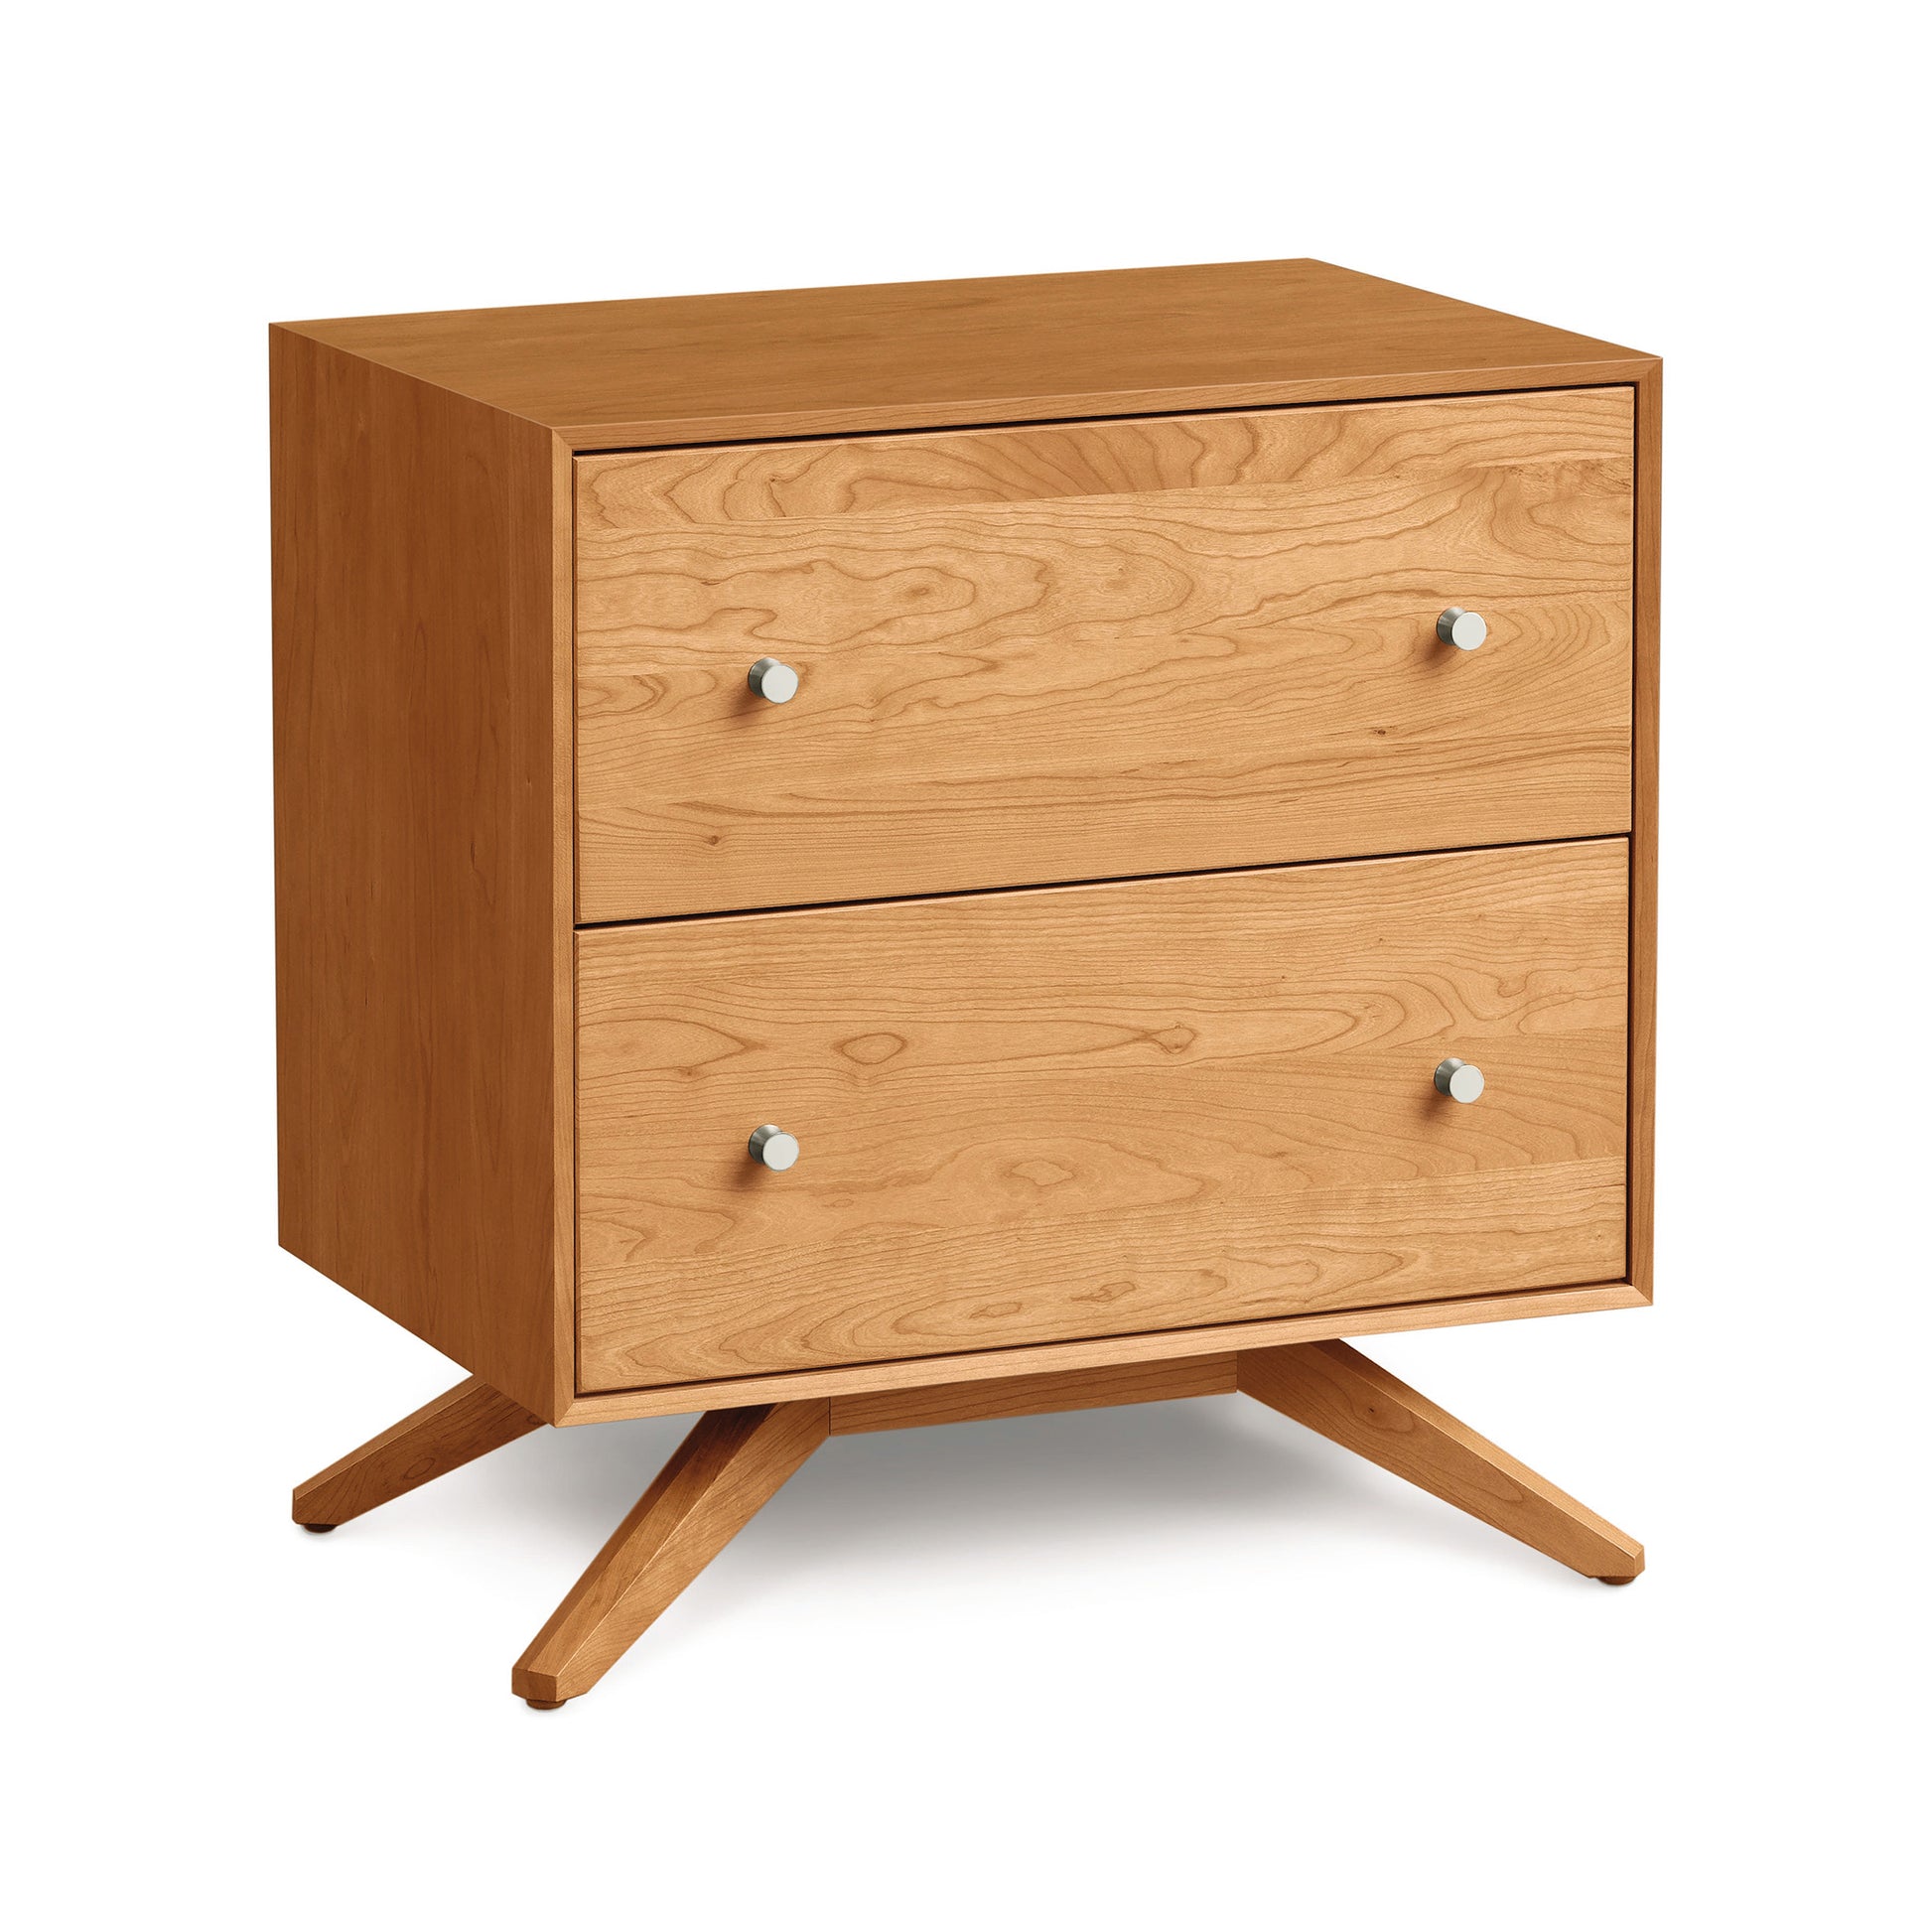 Astrid 2-Drawer Nightstand by Copeland Furniture with modern design and splayed legs on a white background.